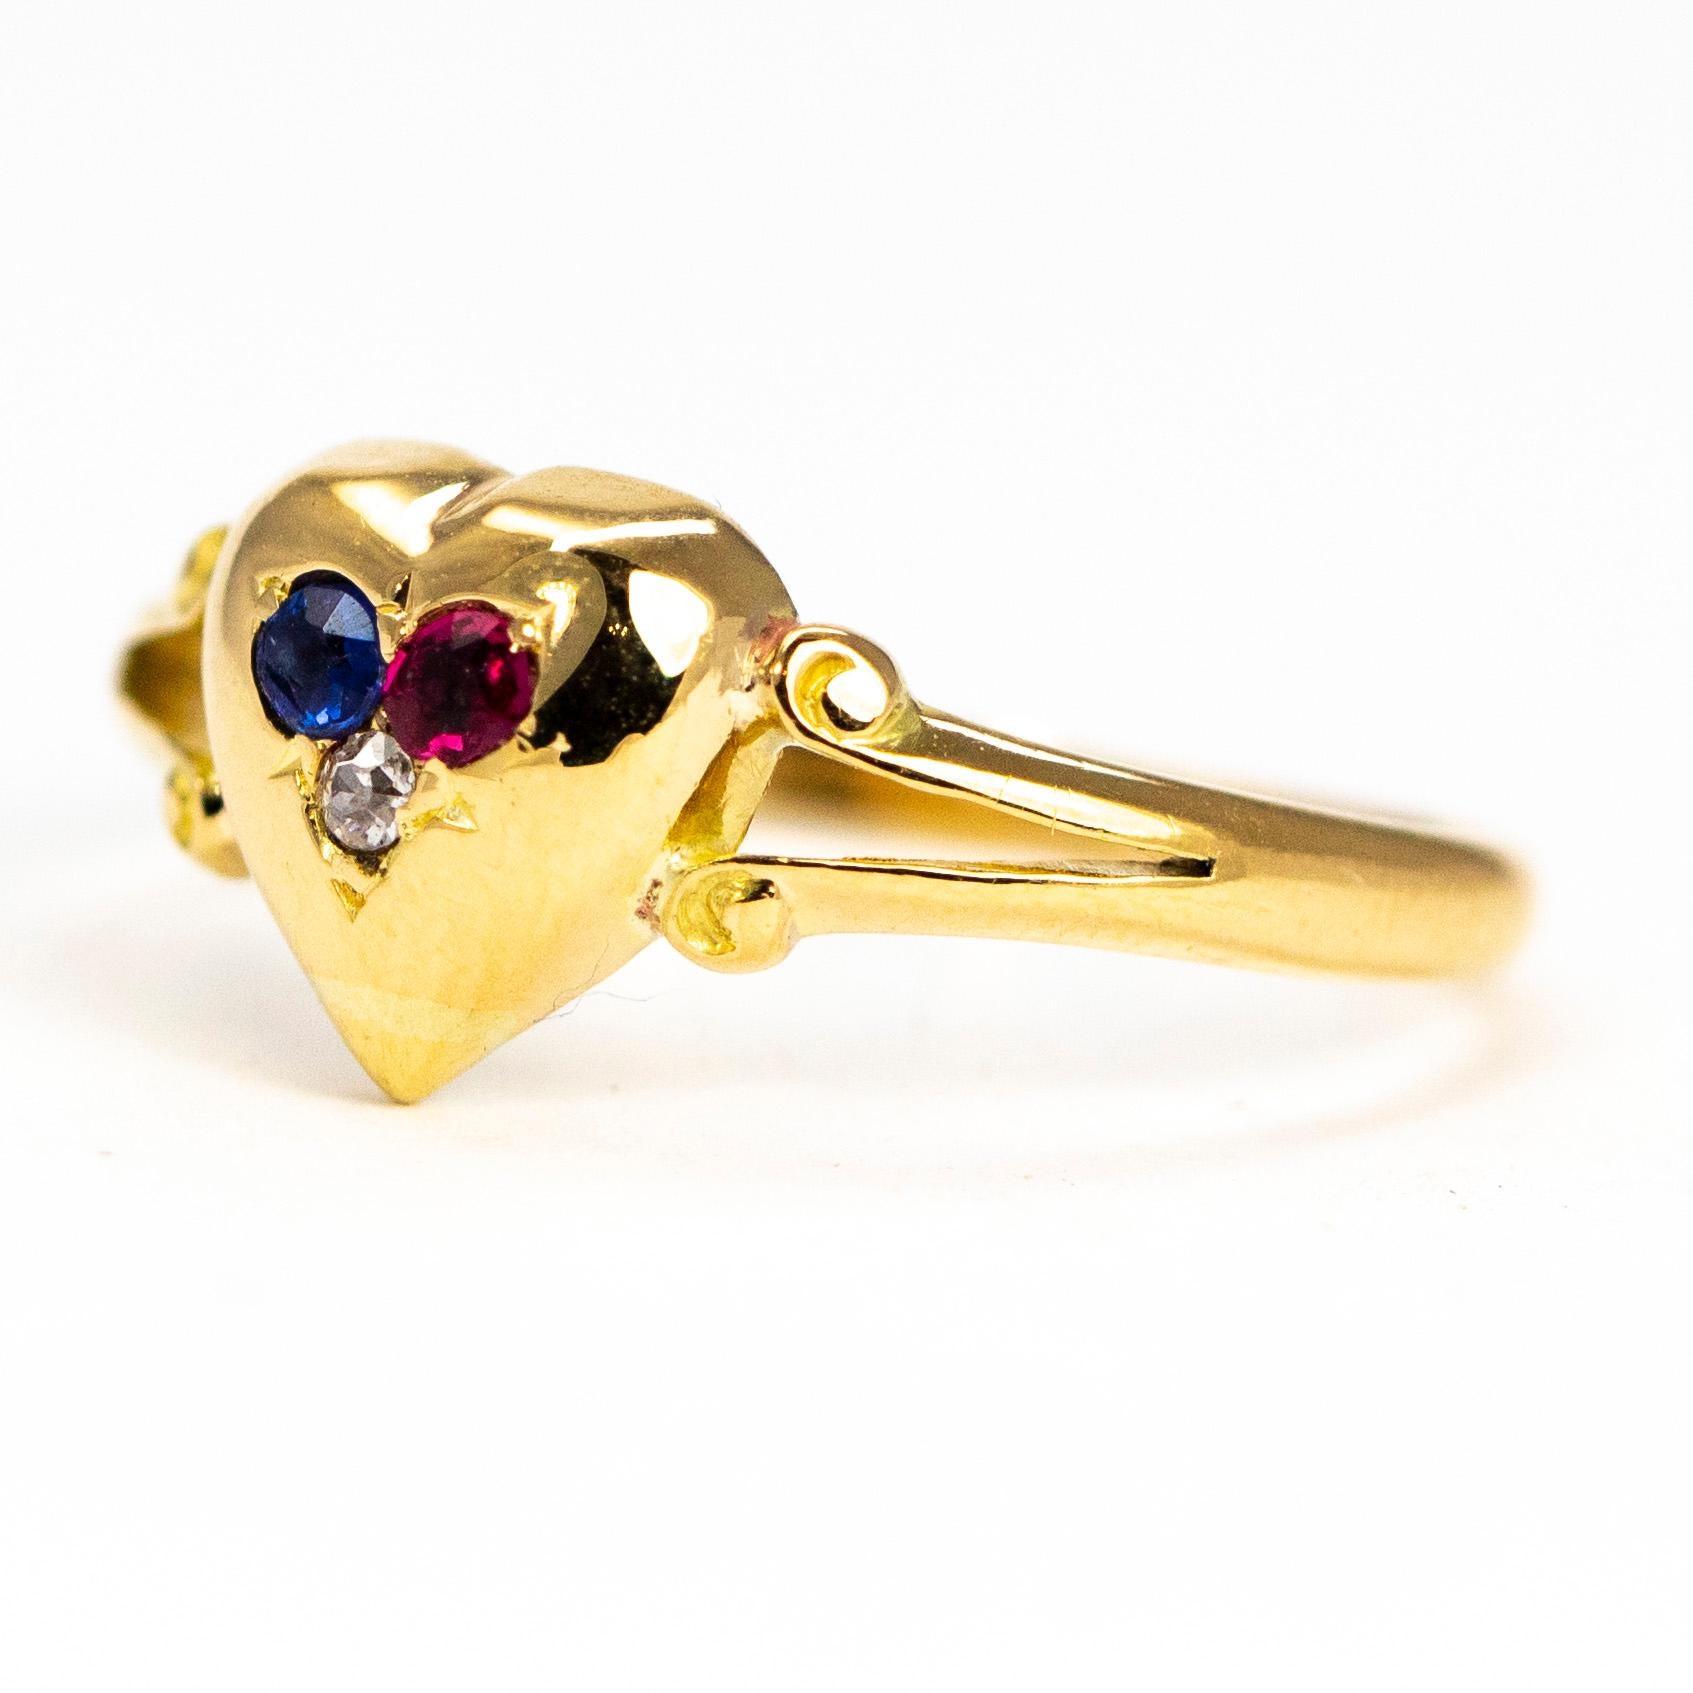 This sweet heart ring holds a trio of small yet stunning stones measuring 4pts each and the diamond measures 3pts. Included in this is a bright blue sapphire, deep pink ruby and a bright diamond. The bright yellow glossy 18 carat gold is crafted